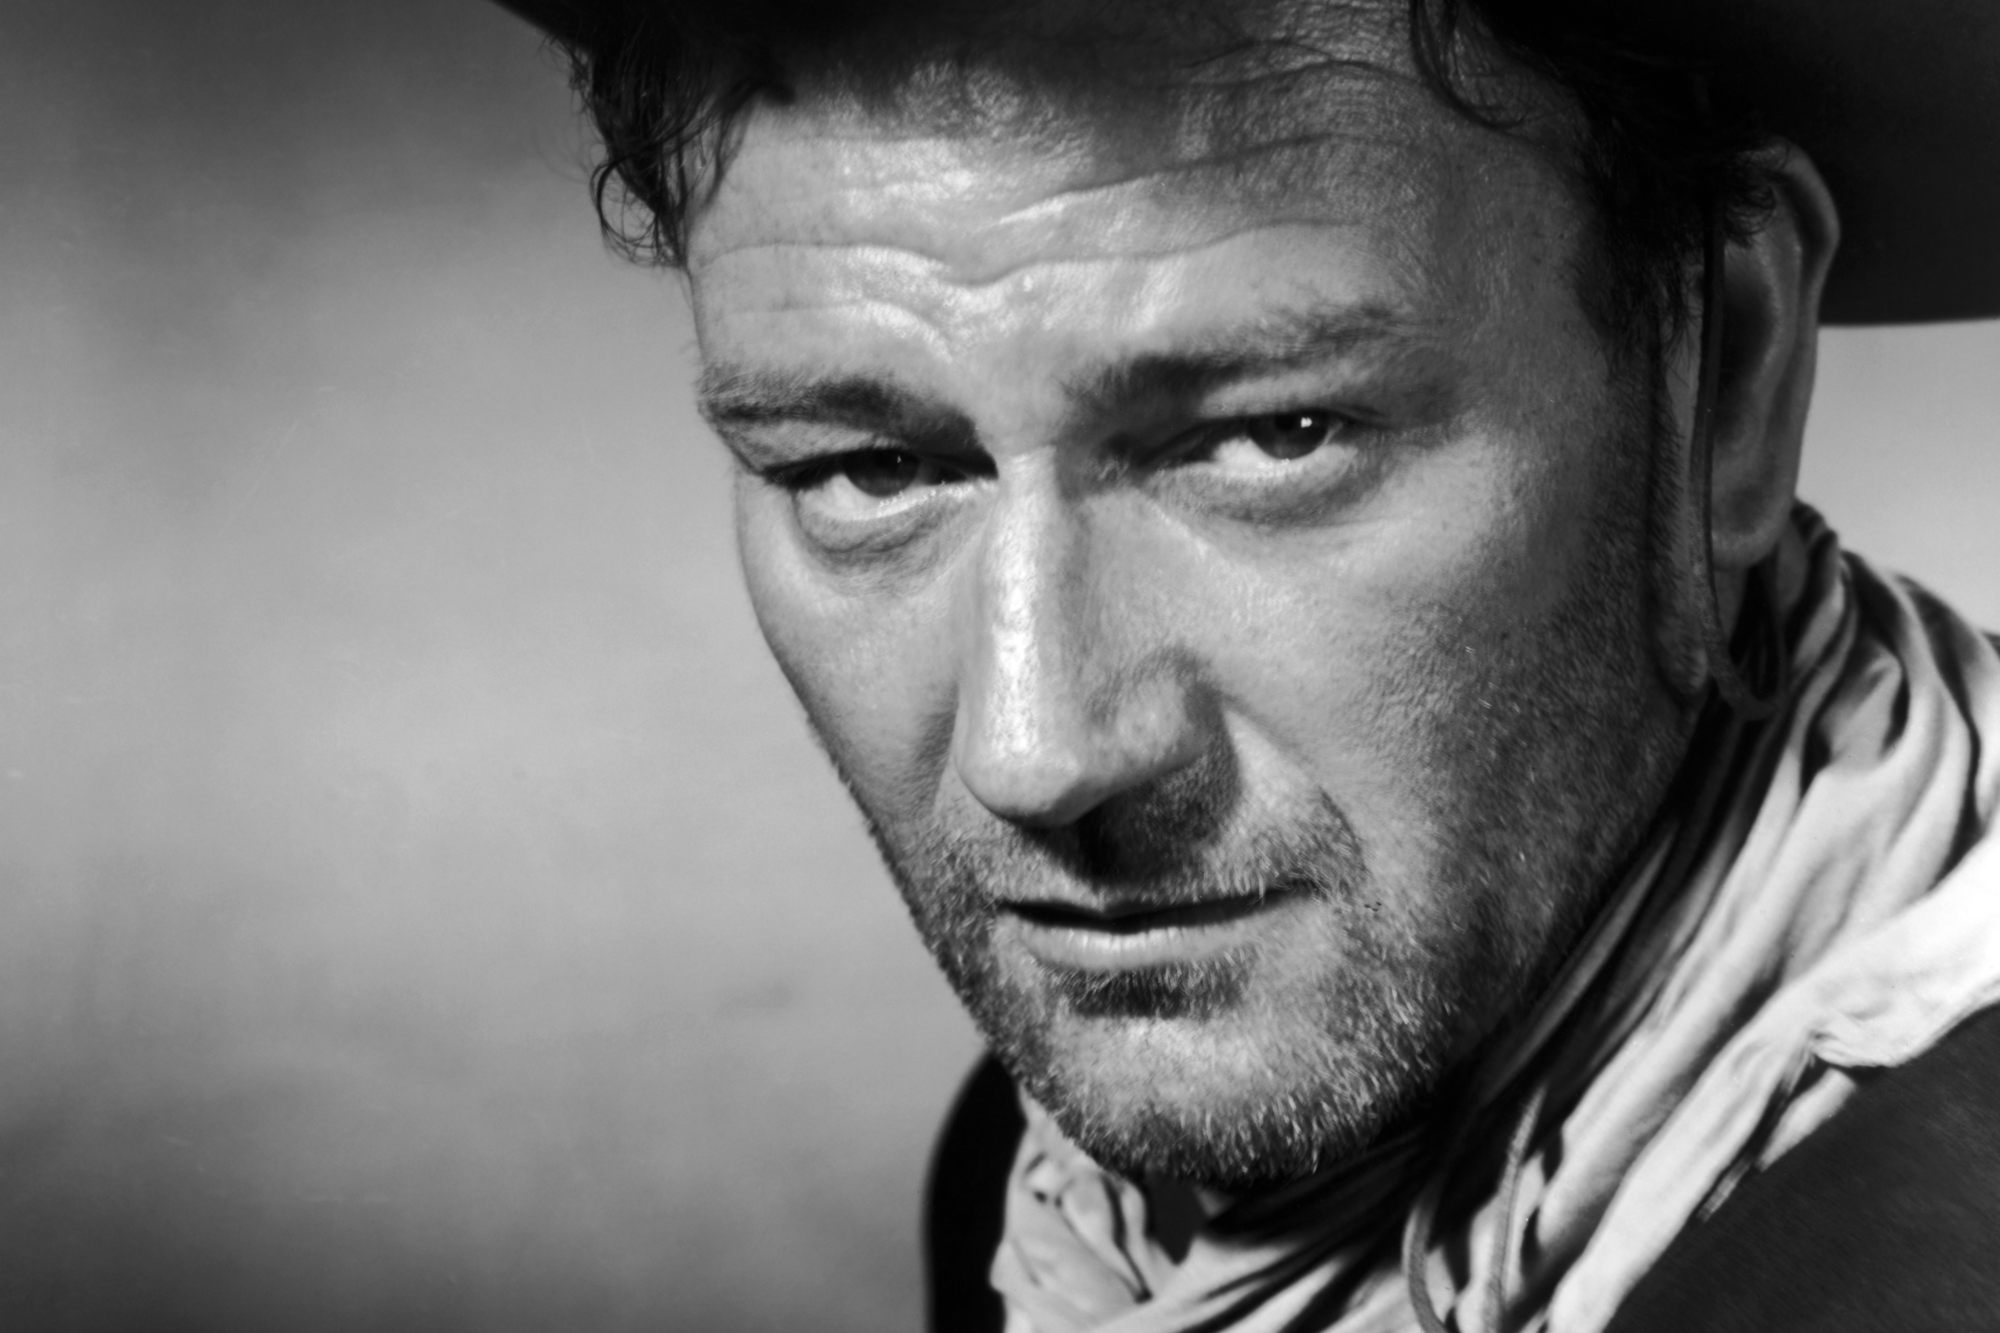 'Three Godfathers' John Wayne as Robert Hightower in a black-and-white picture giving a serious look into the camera wearing a Western costume